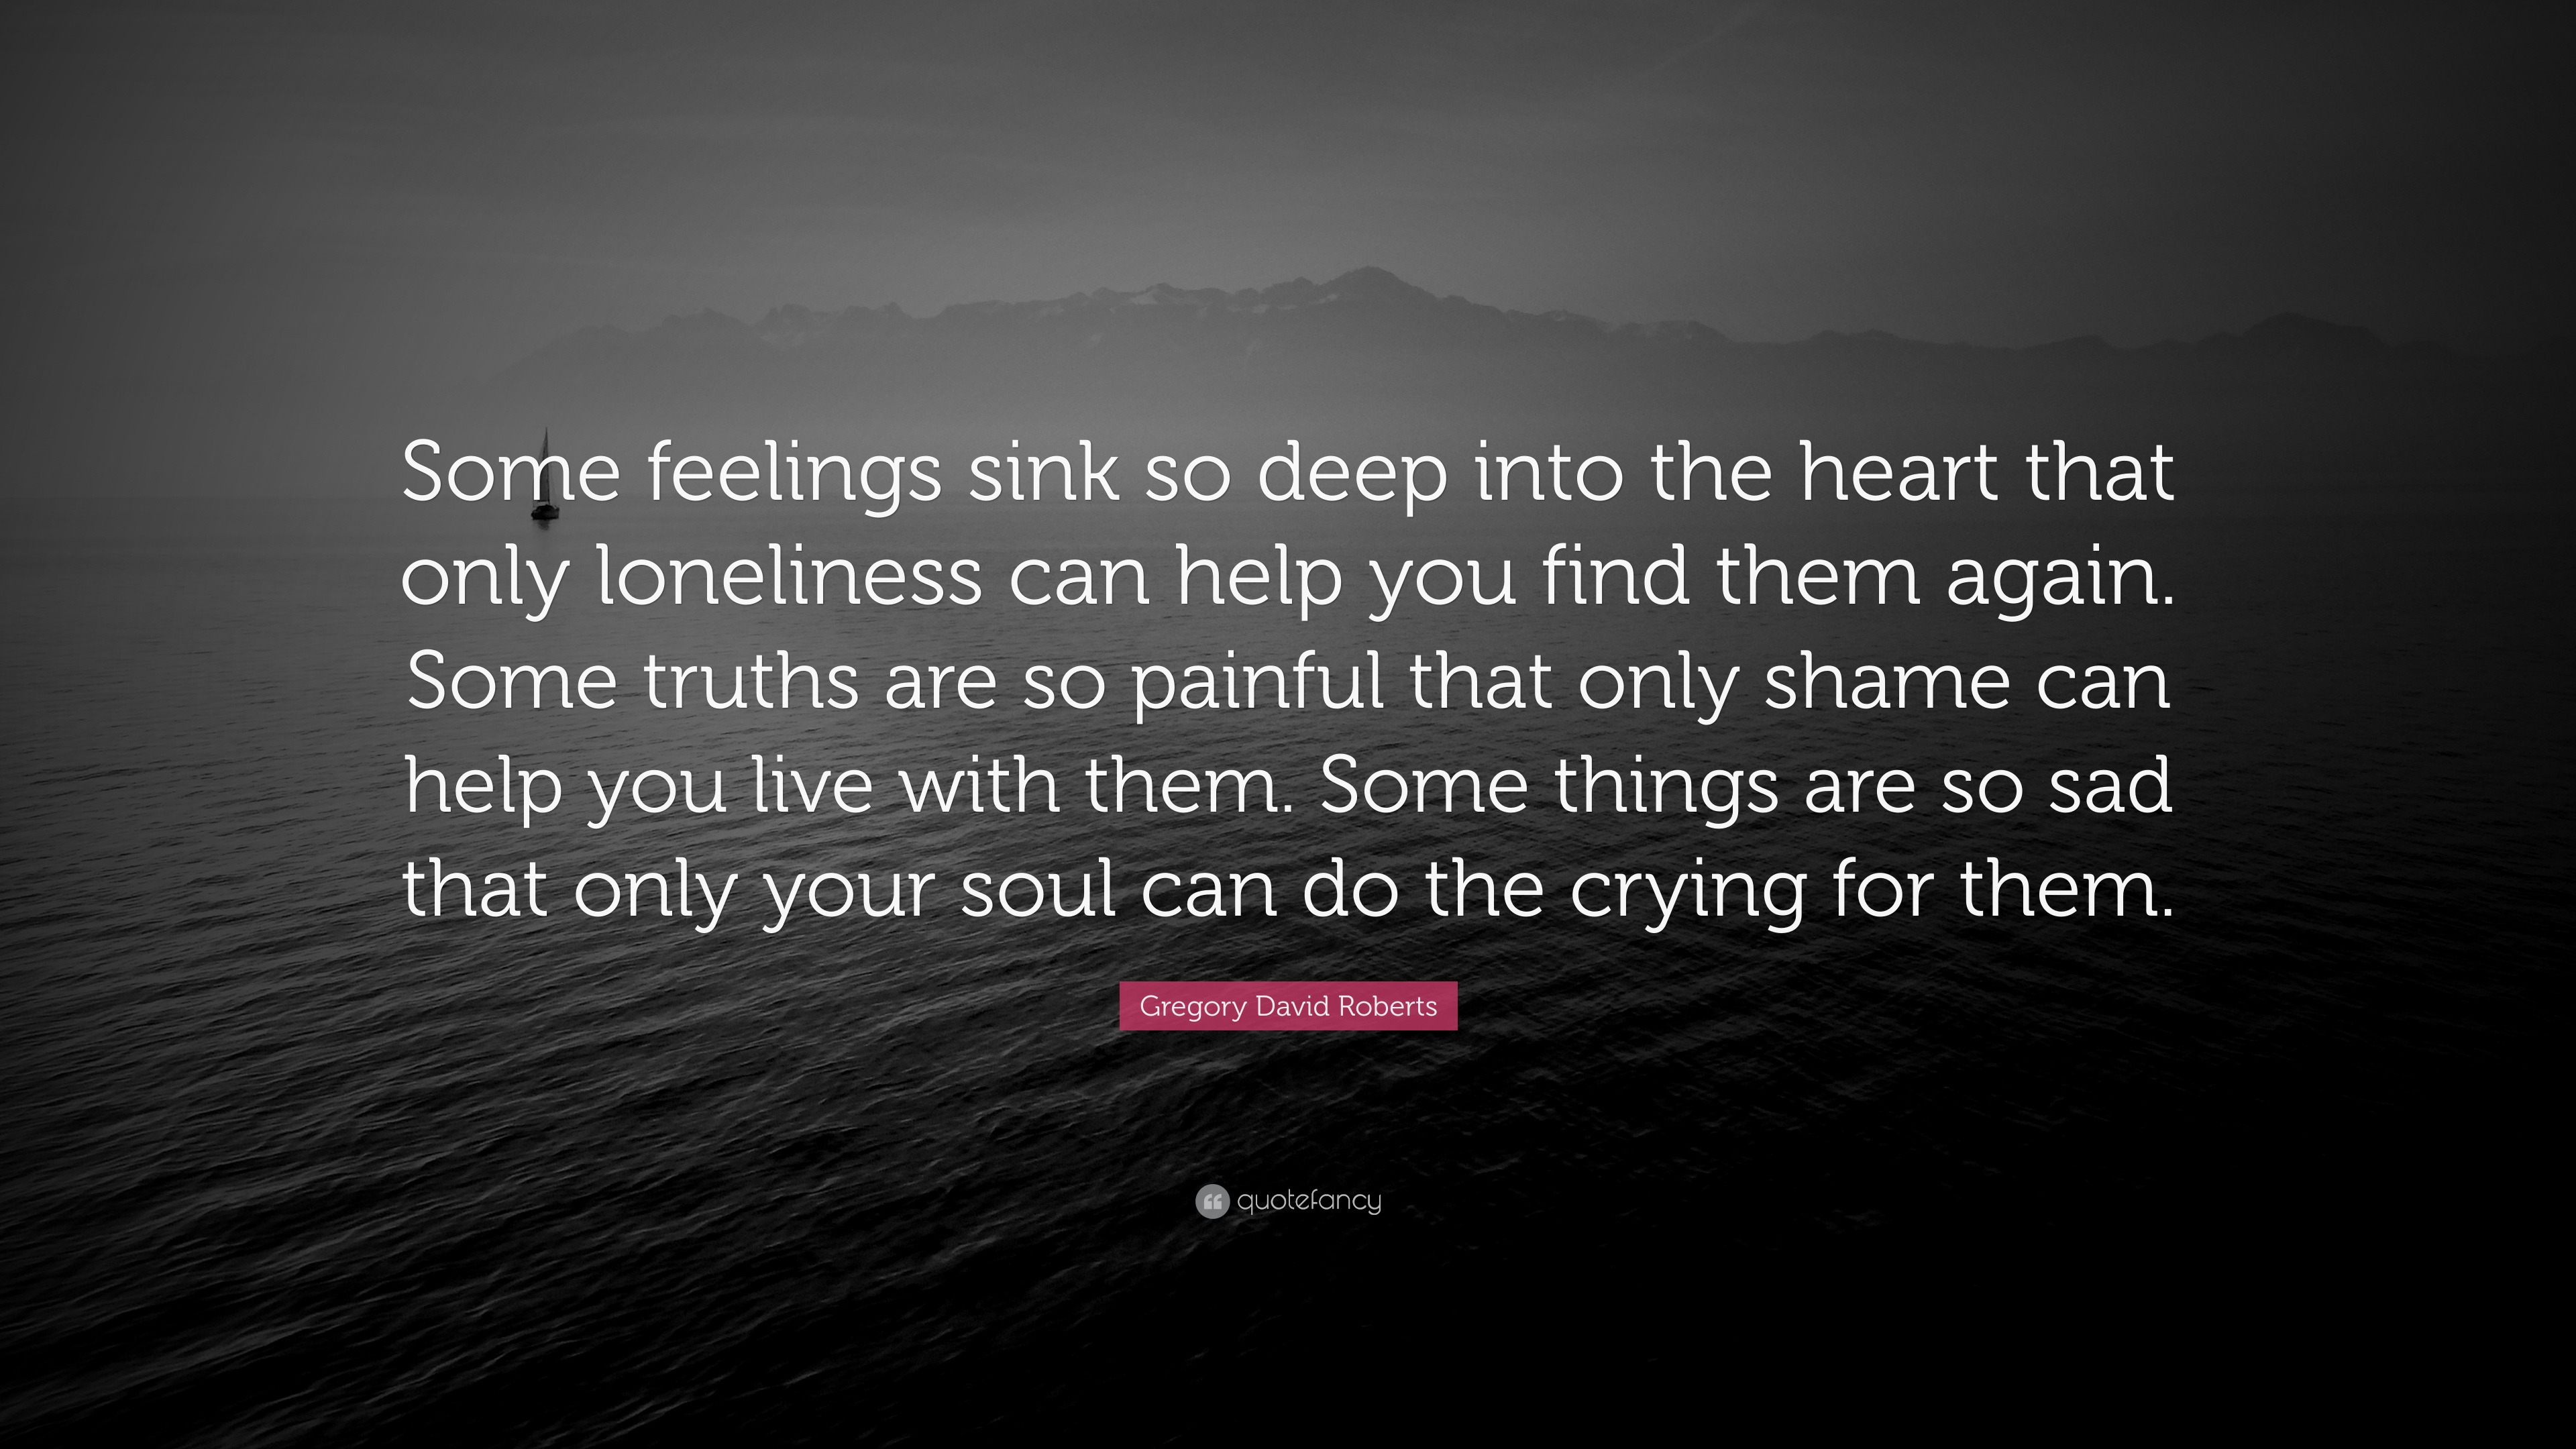 Gregory David Roberts Quote Some Feelings Sink So Deep Into The Heart That Only Loneliness Can Help You Find Them Again Some Truths Are So Painful